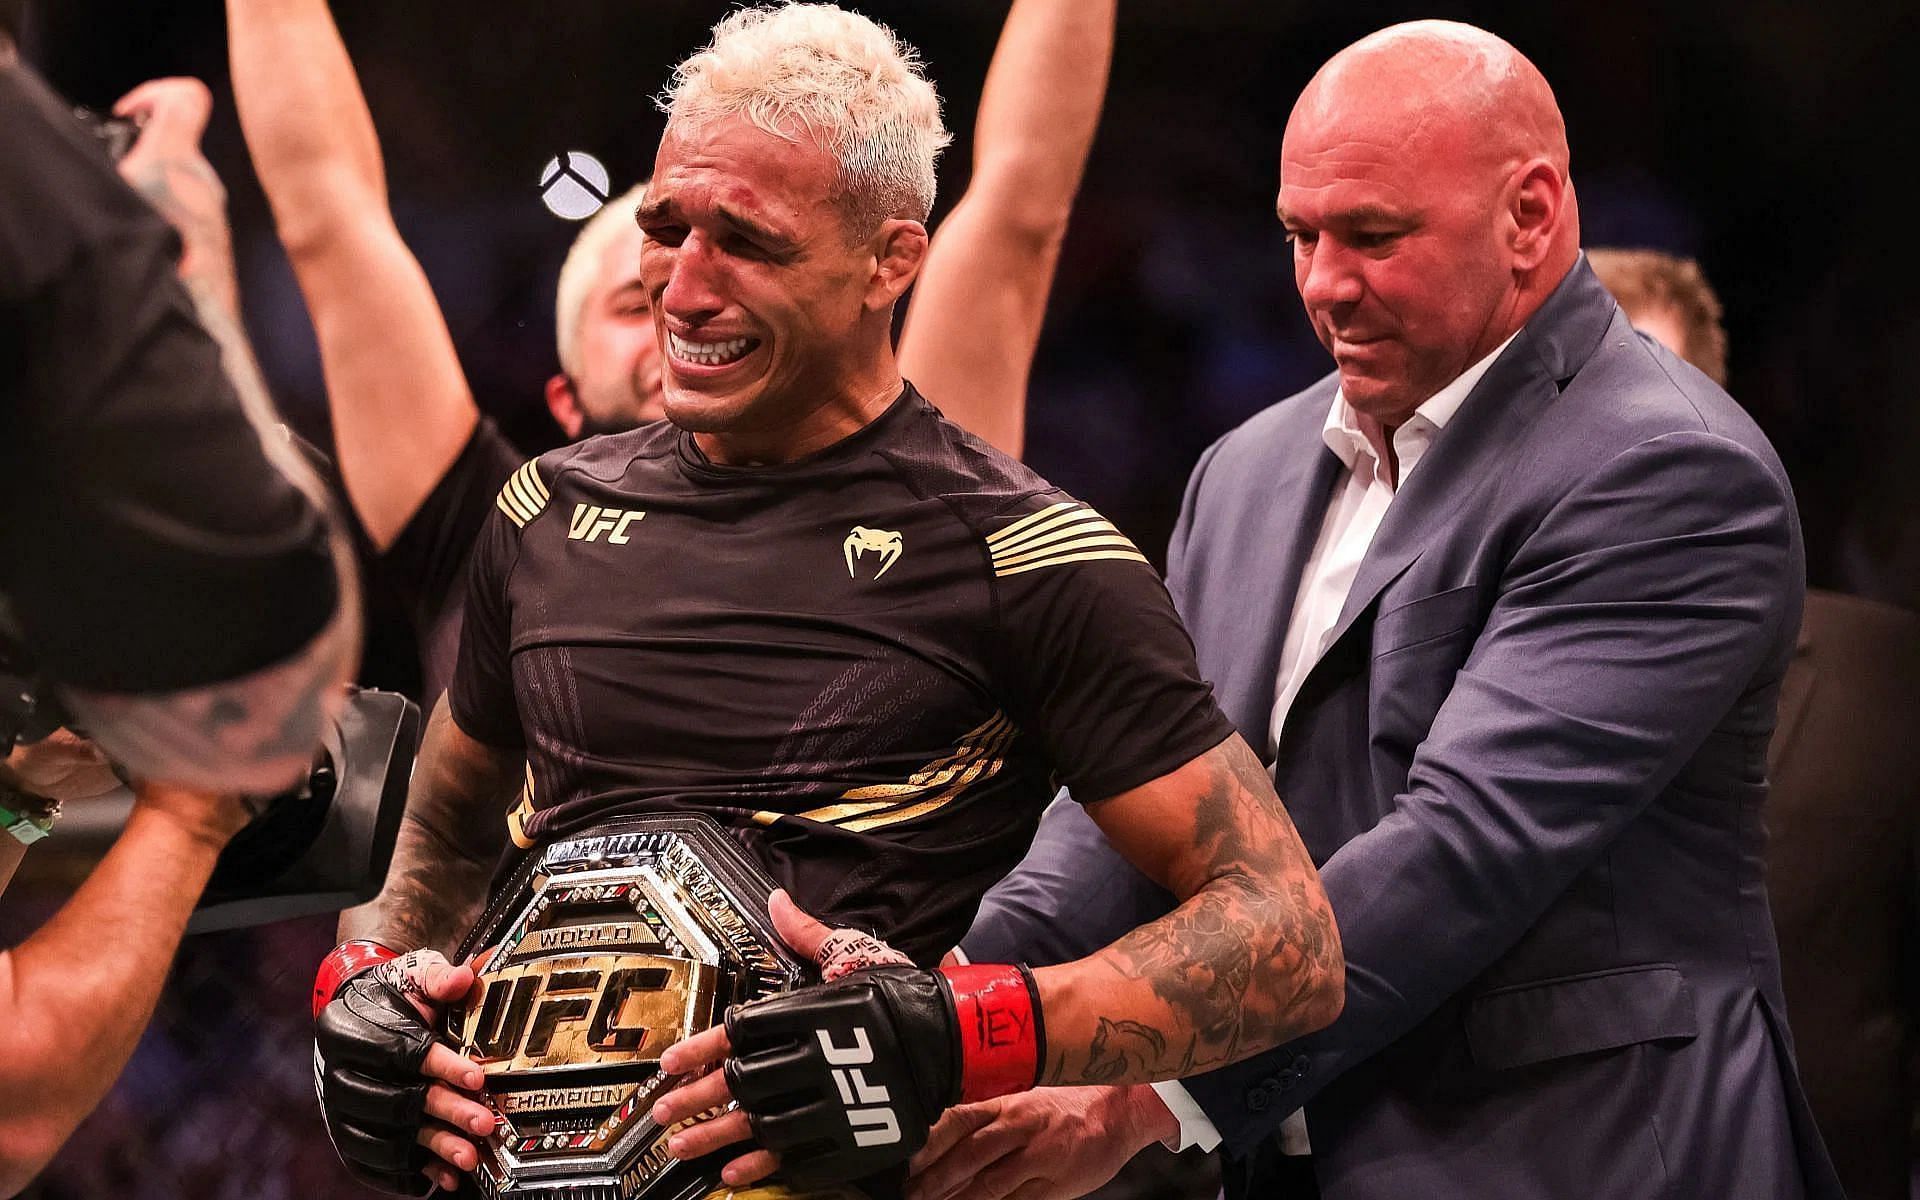 Charles Oliveira has been forced to vacate the UFC lightweight title